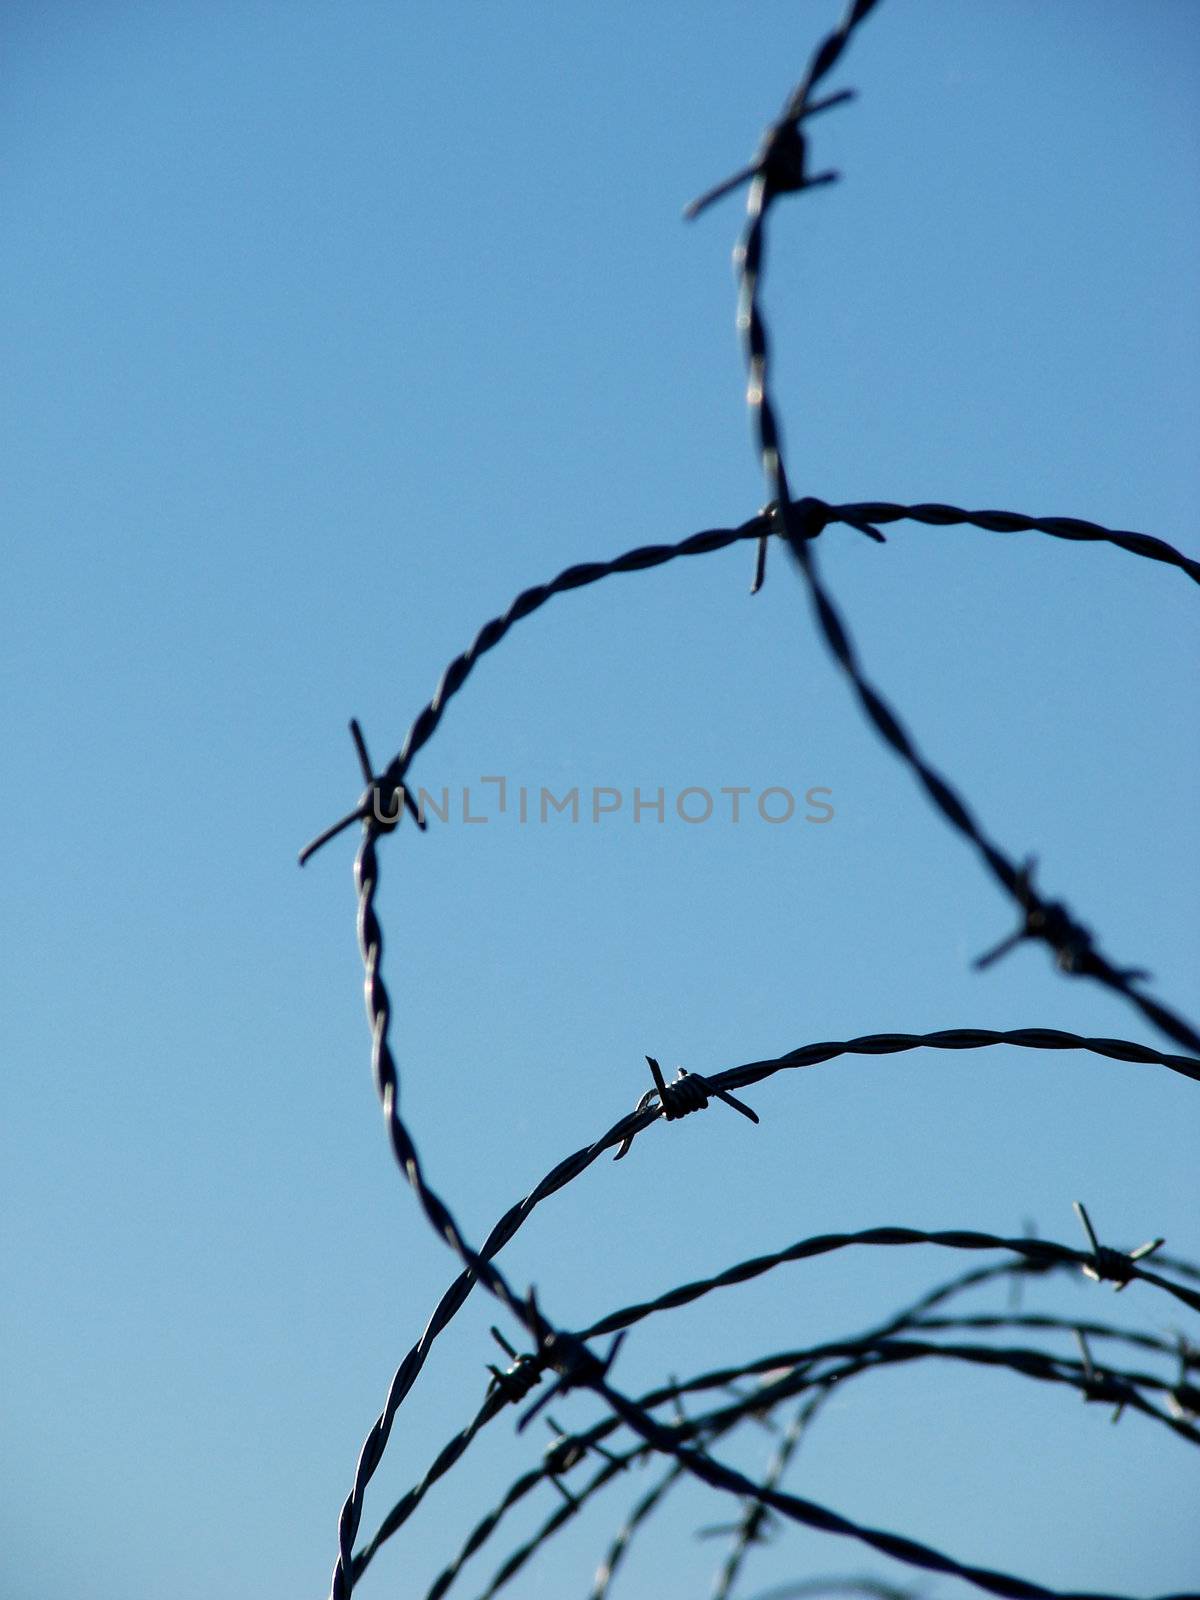 Barbed wire 3 by Thorvis